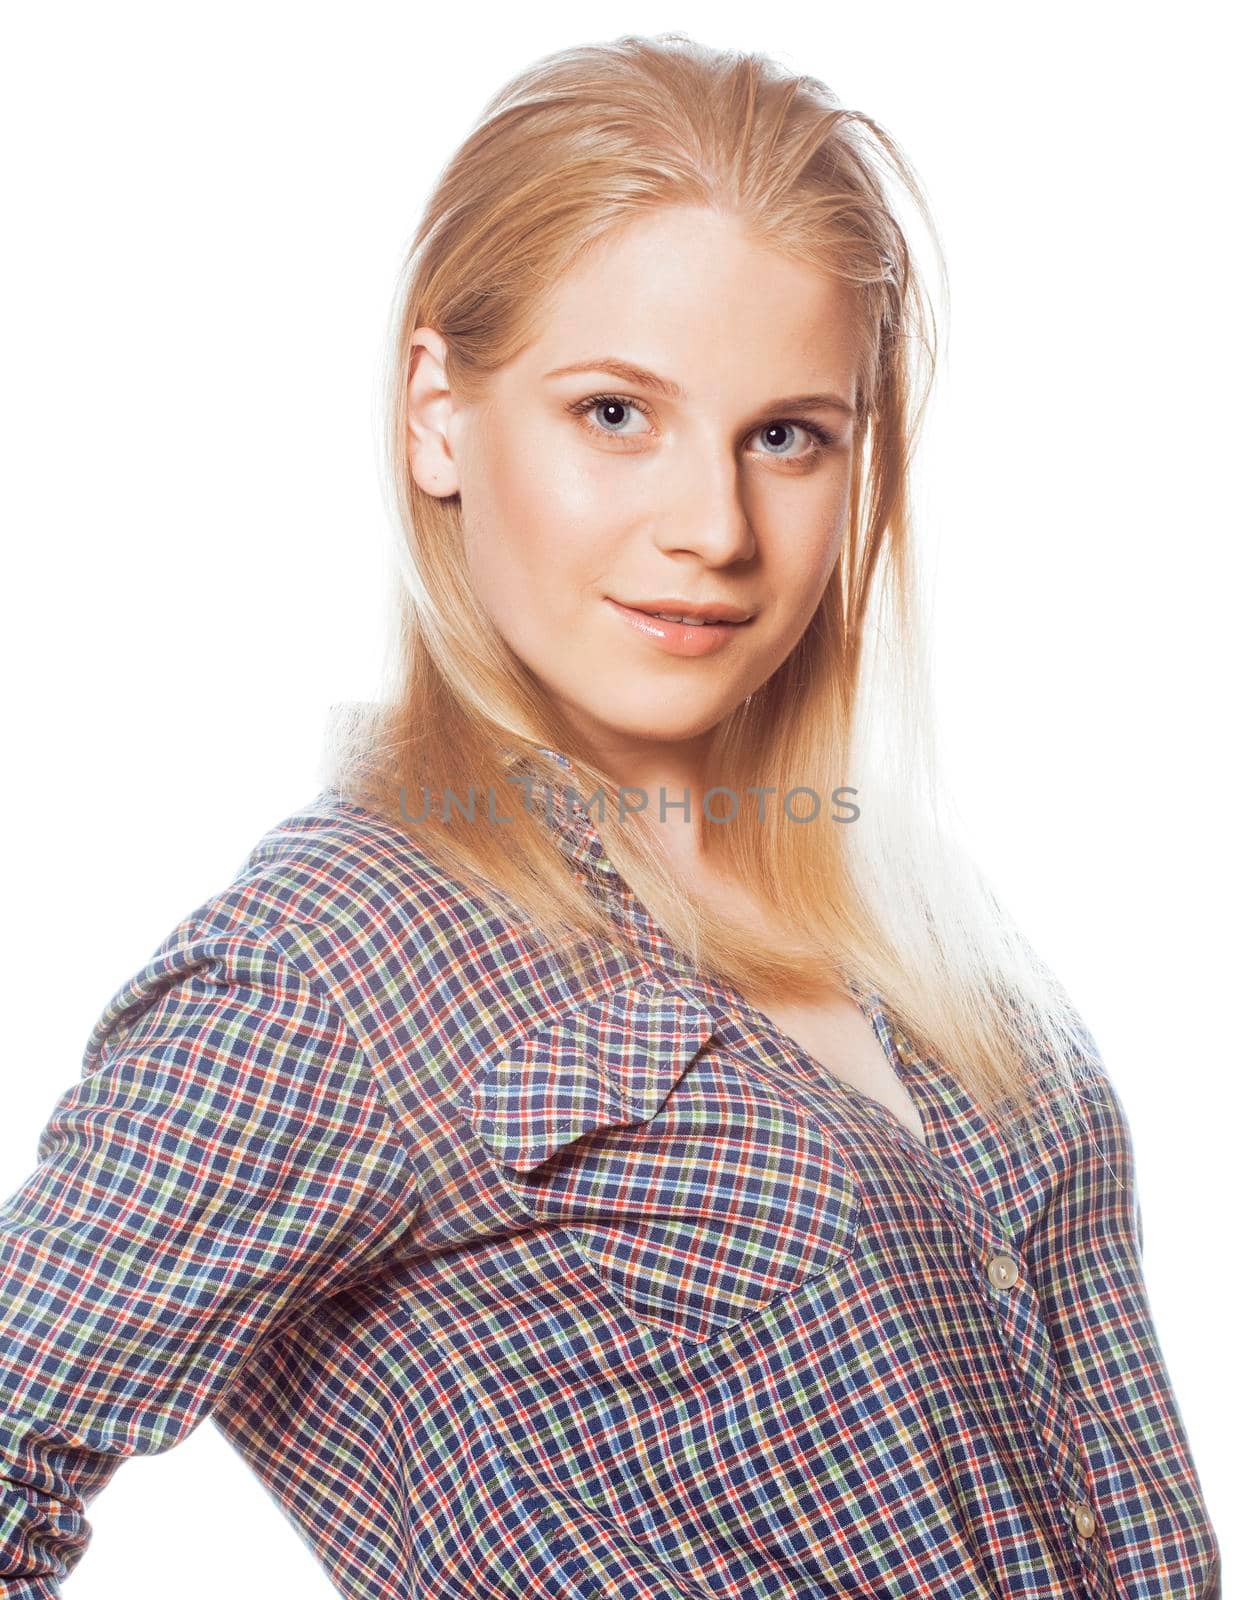 young pretty stylish blond hipster girl posing emotional isolated on white background happy smiling cool smile, lifestyle people concept close up